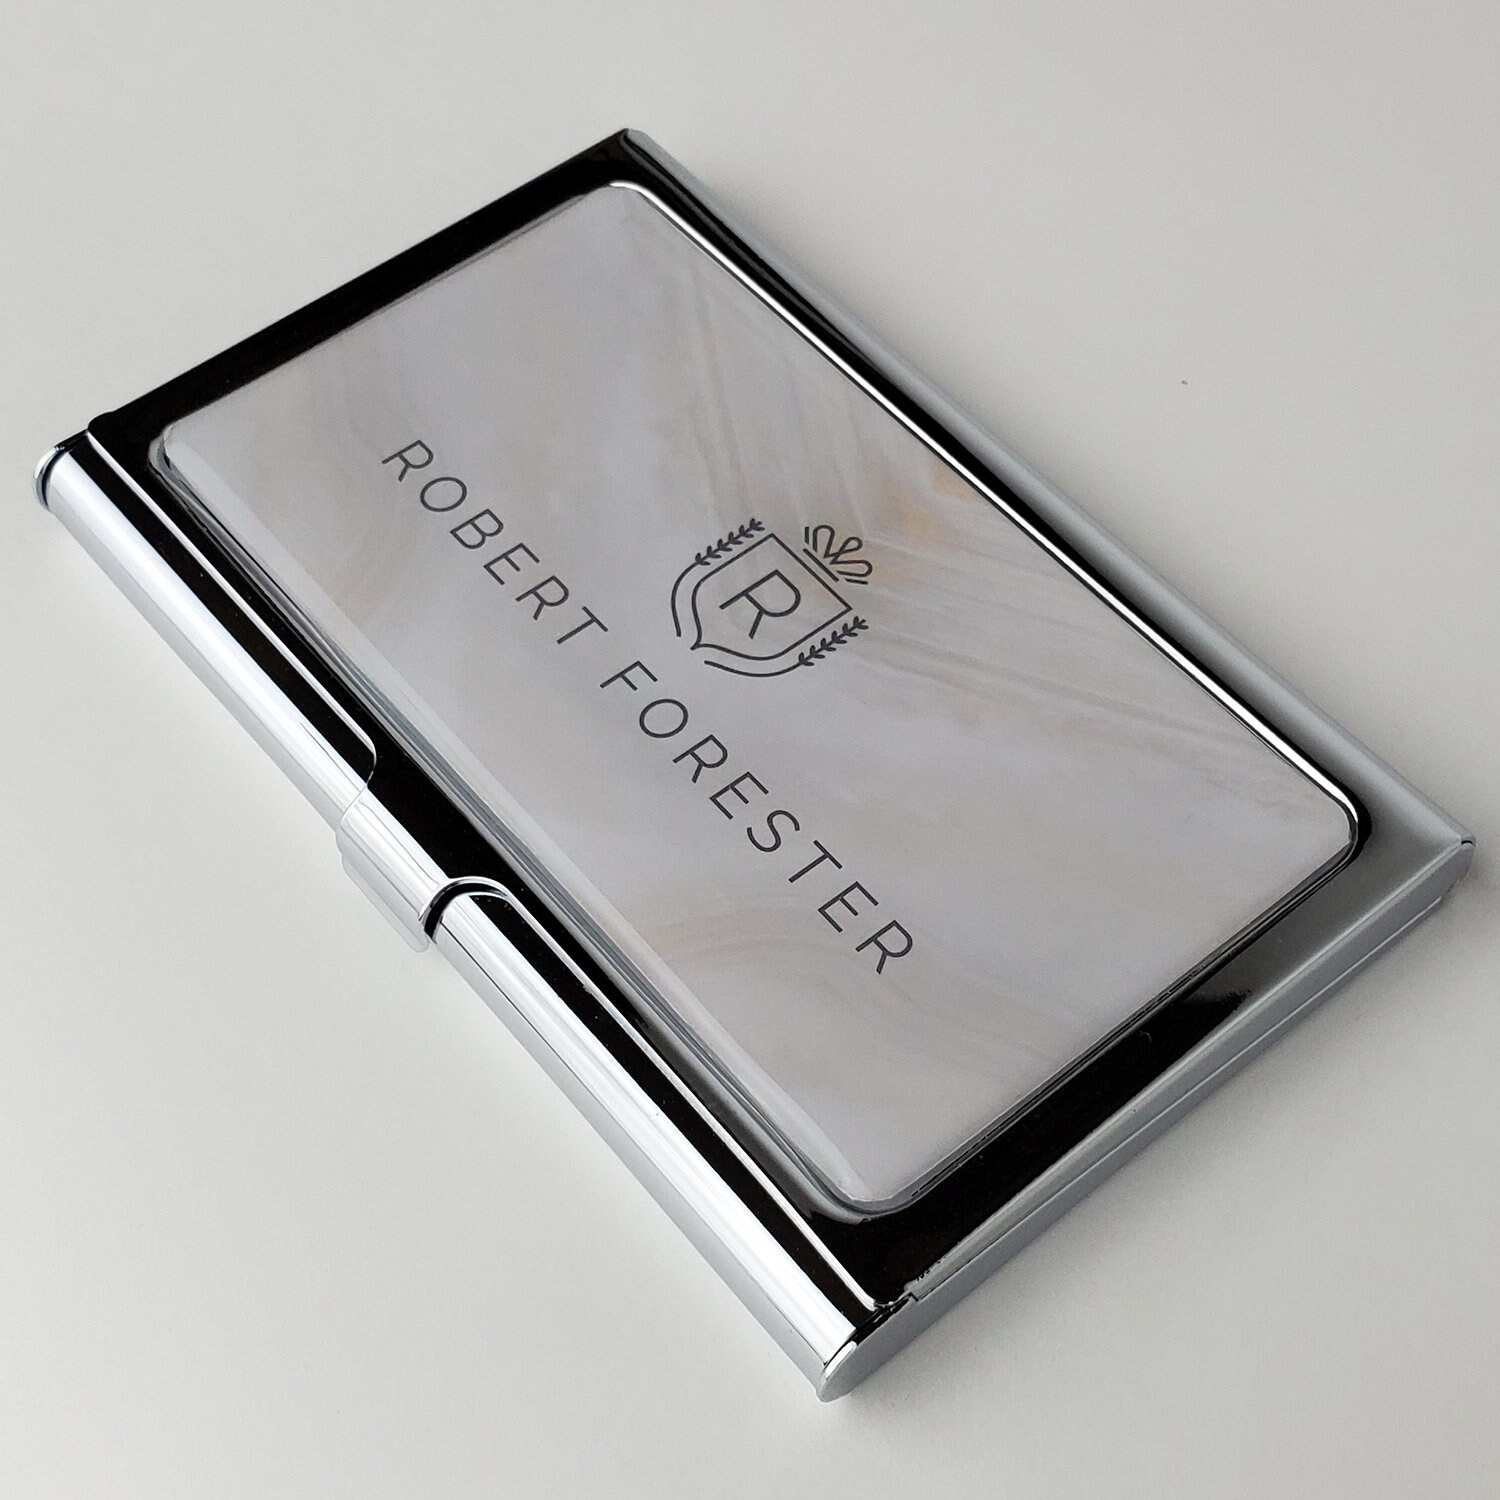 Mens Business Card Holder, Personalized Card Case, Gifts for Men, Card Organizer, Custom Card Holder Office Corporate Gift New Job Gift E111